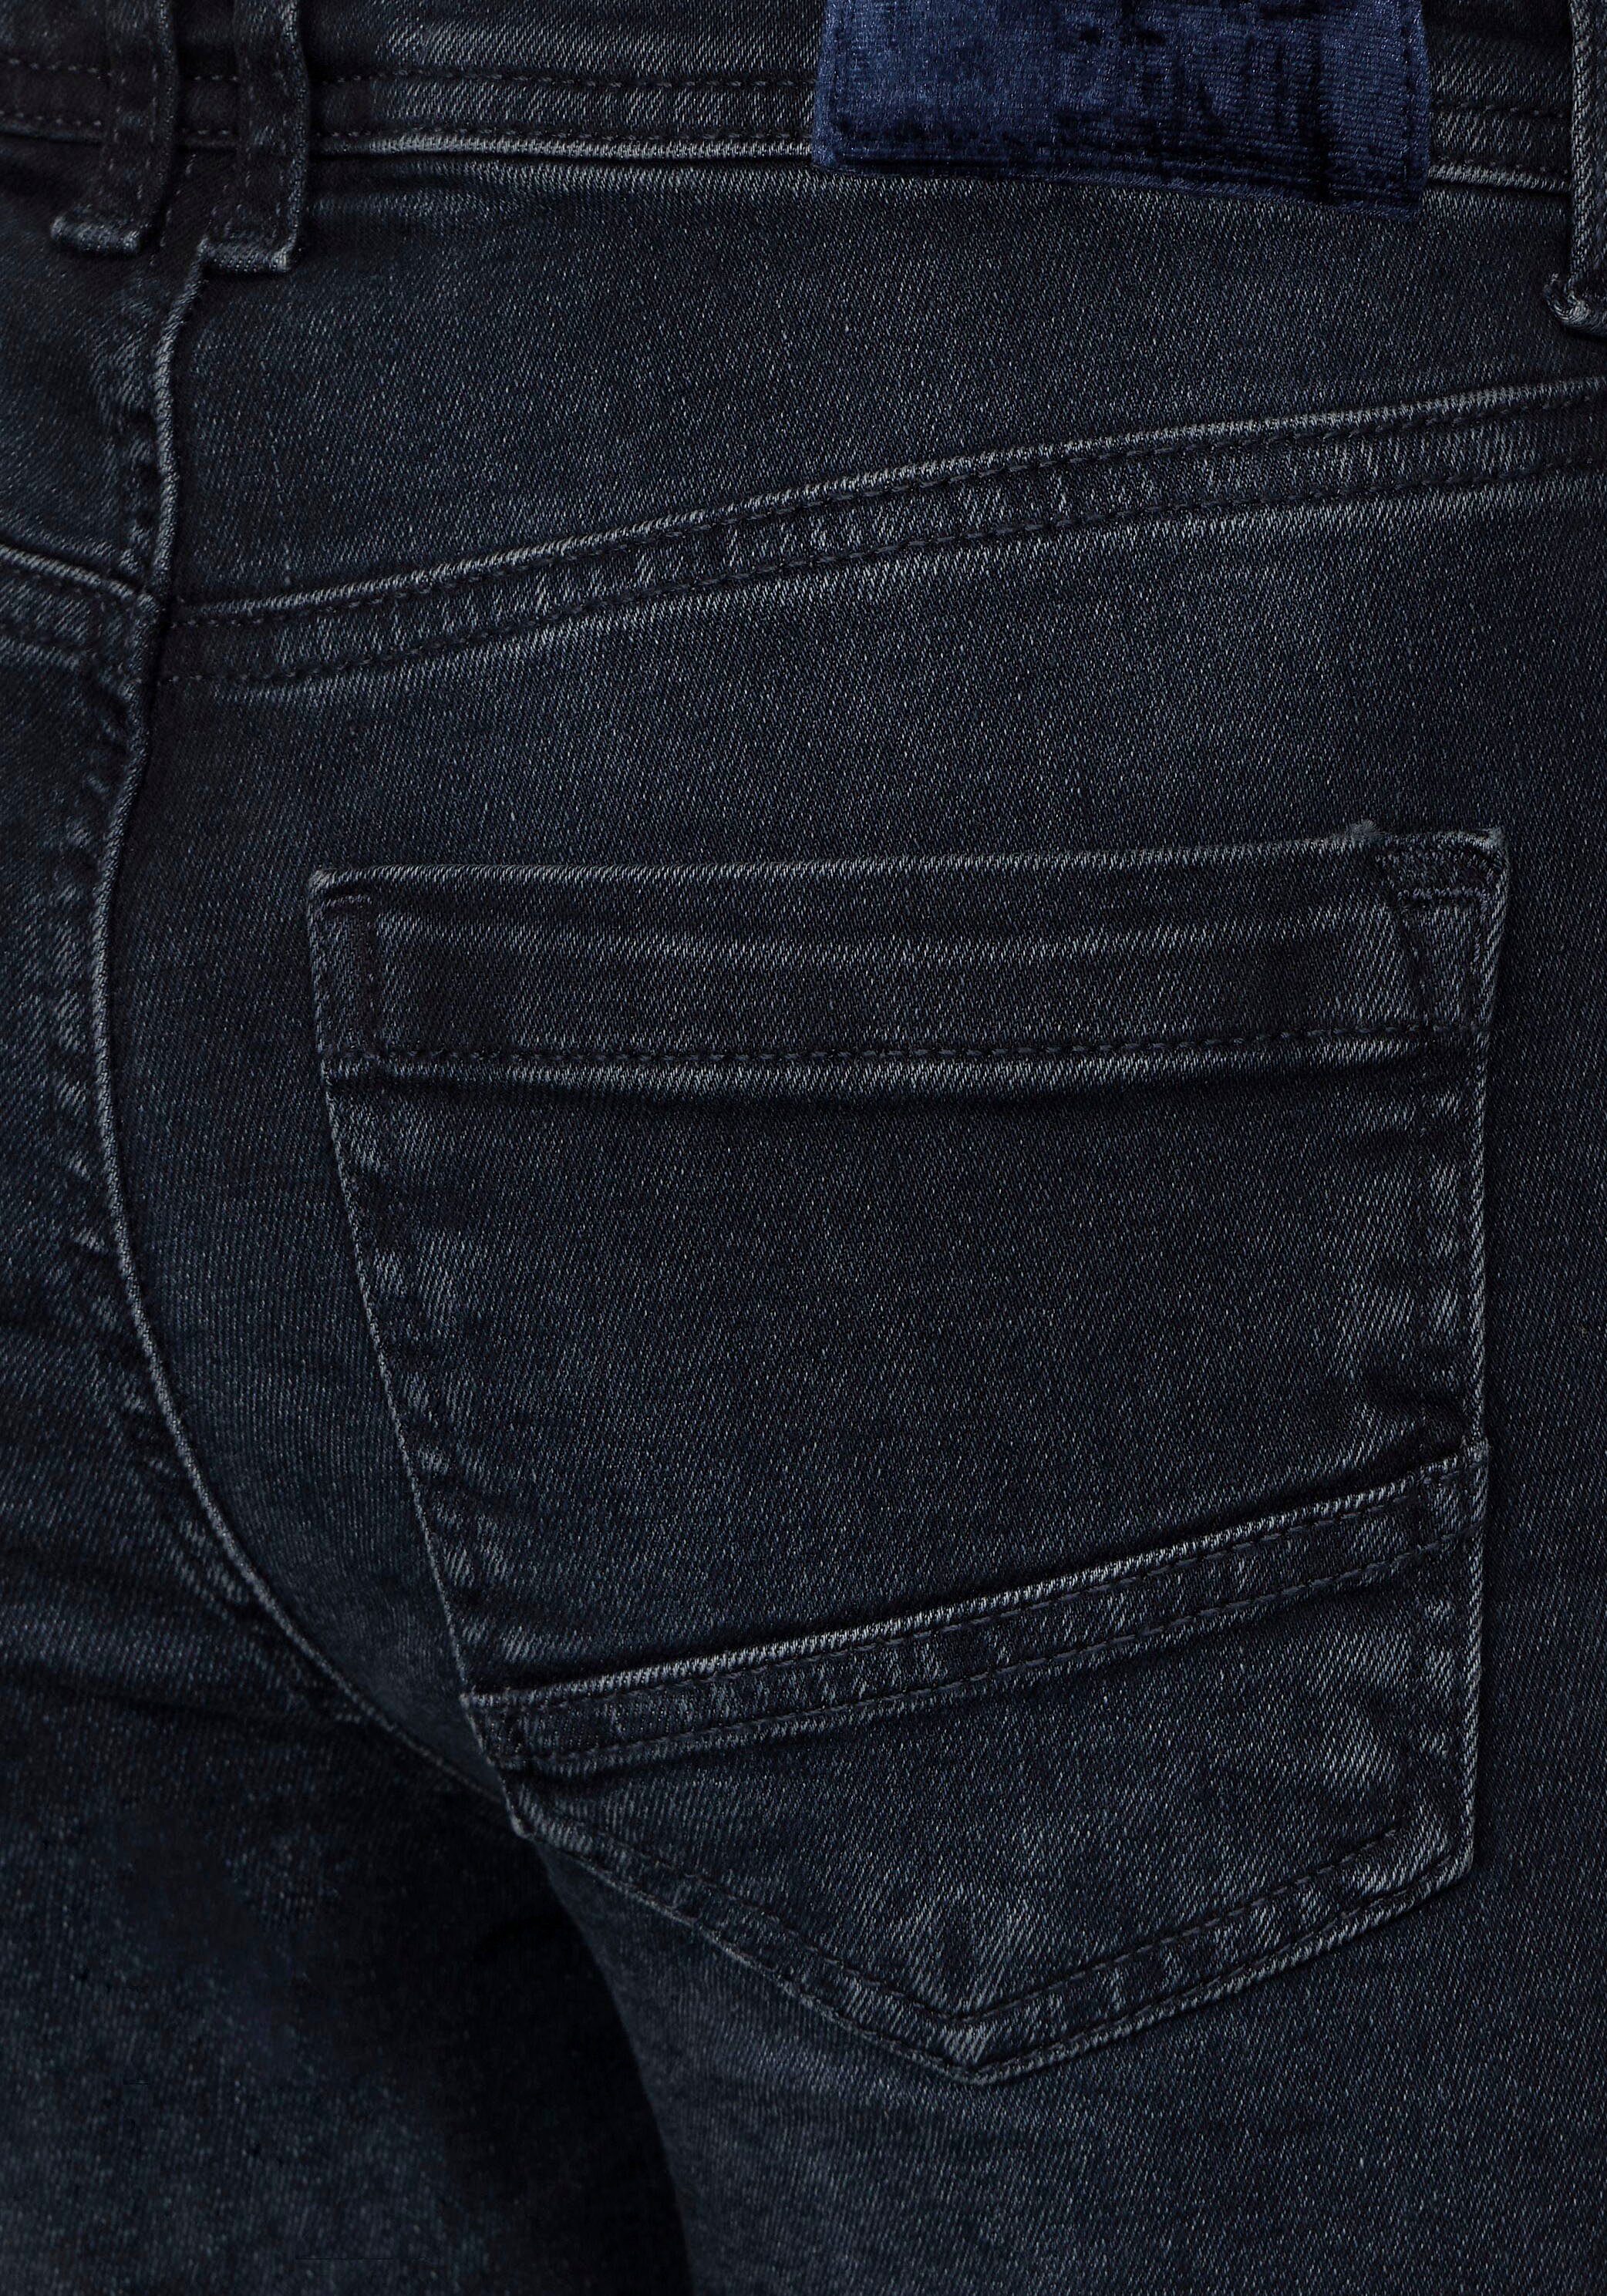 STREET ONE Slim fit jeans in donkere wassing